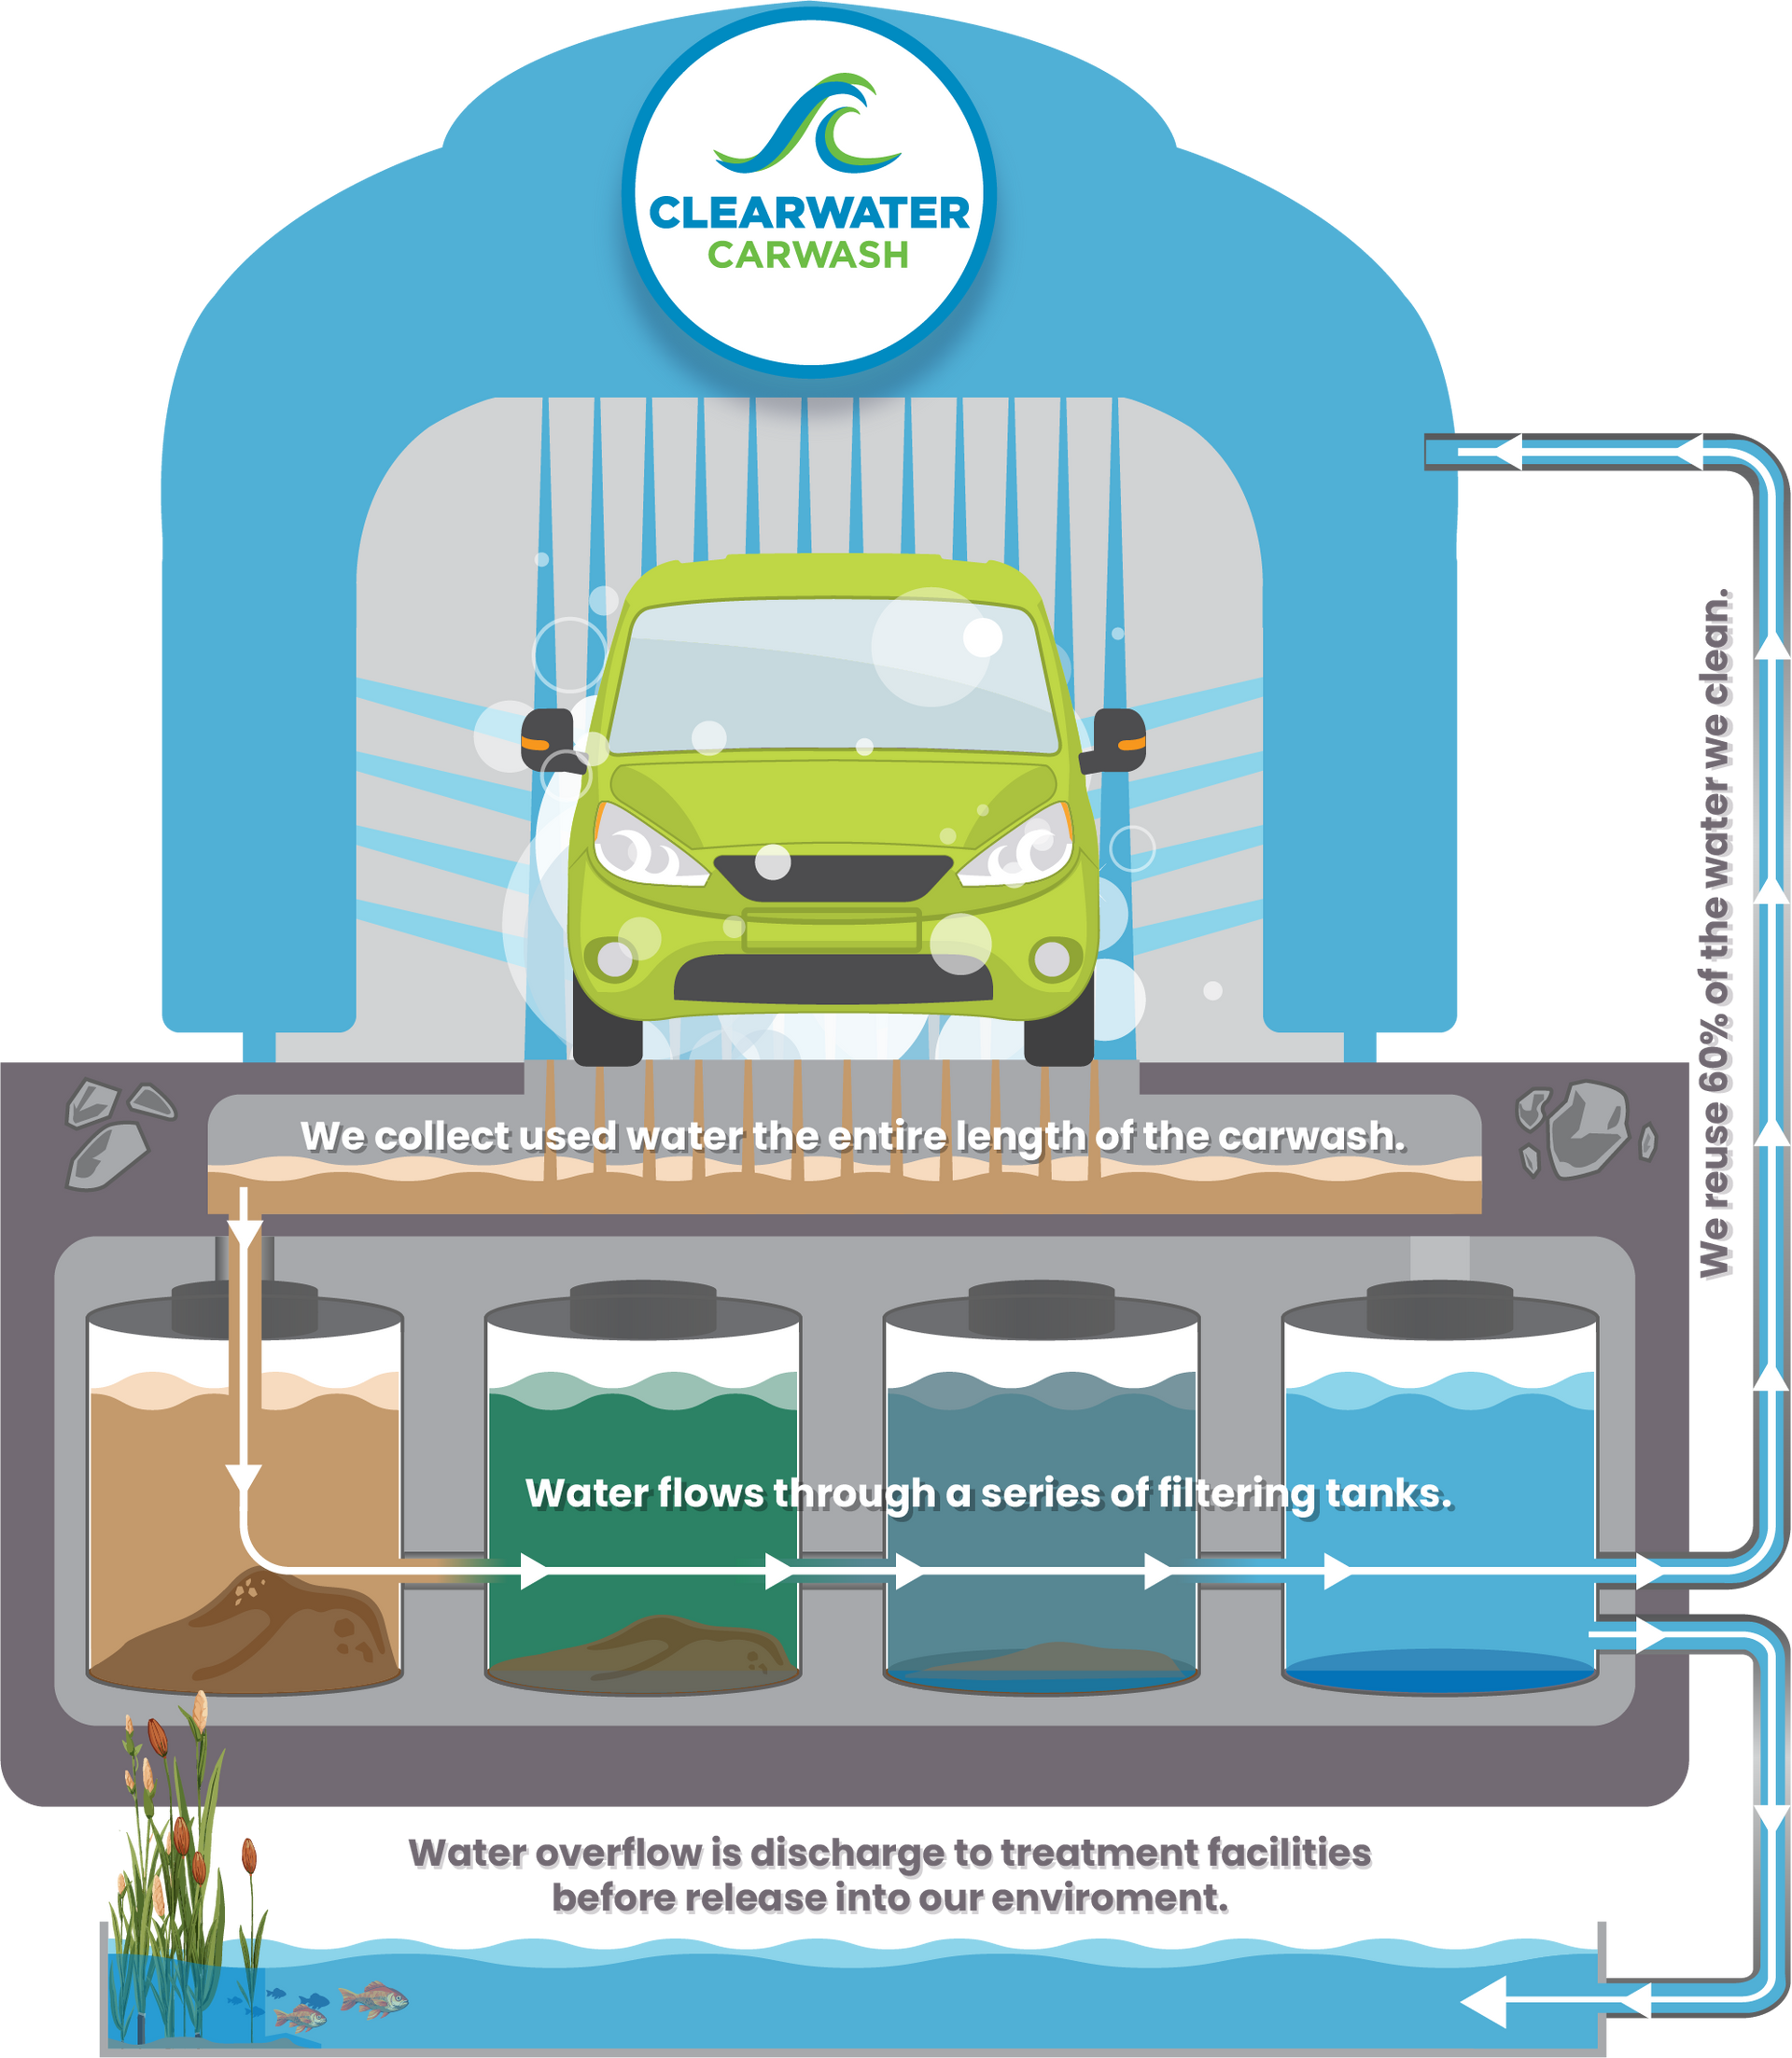 ClearWater CarWash infographic about water usage and reclaim water.